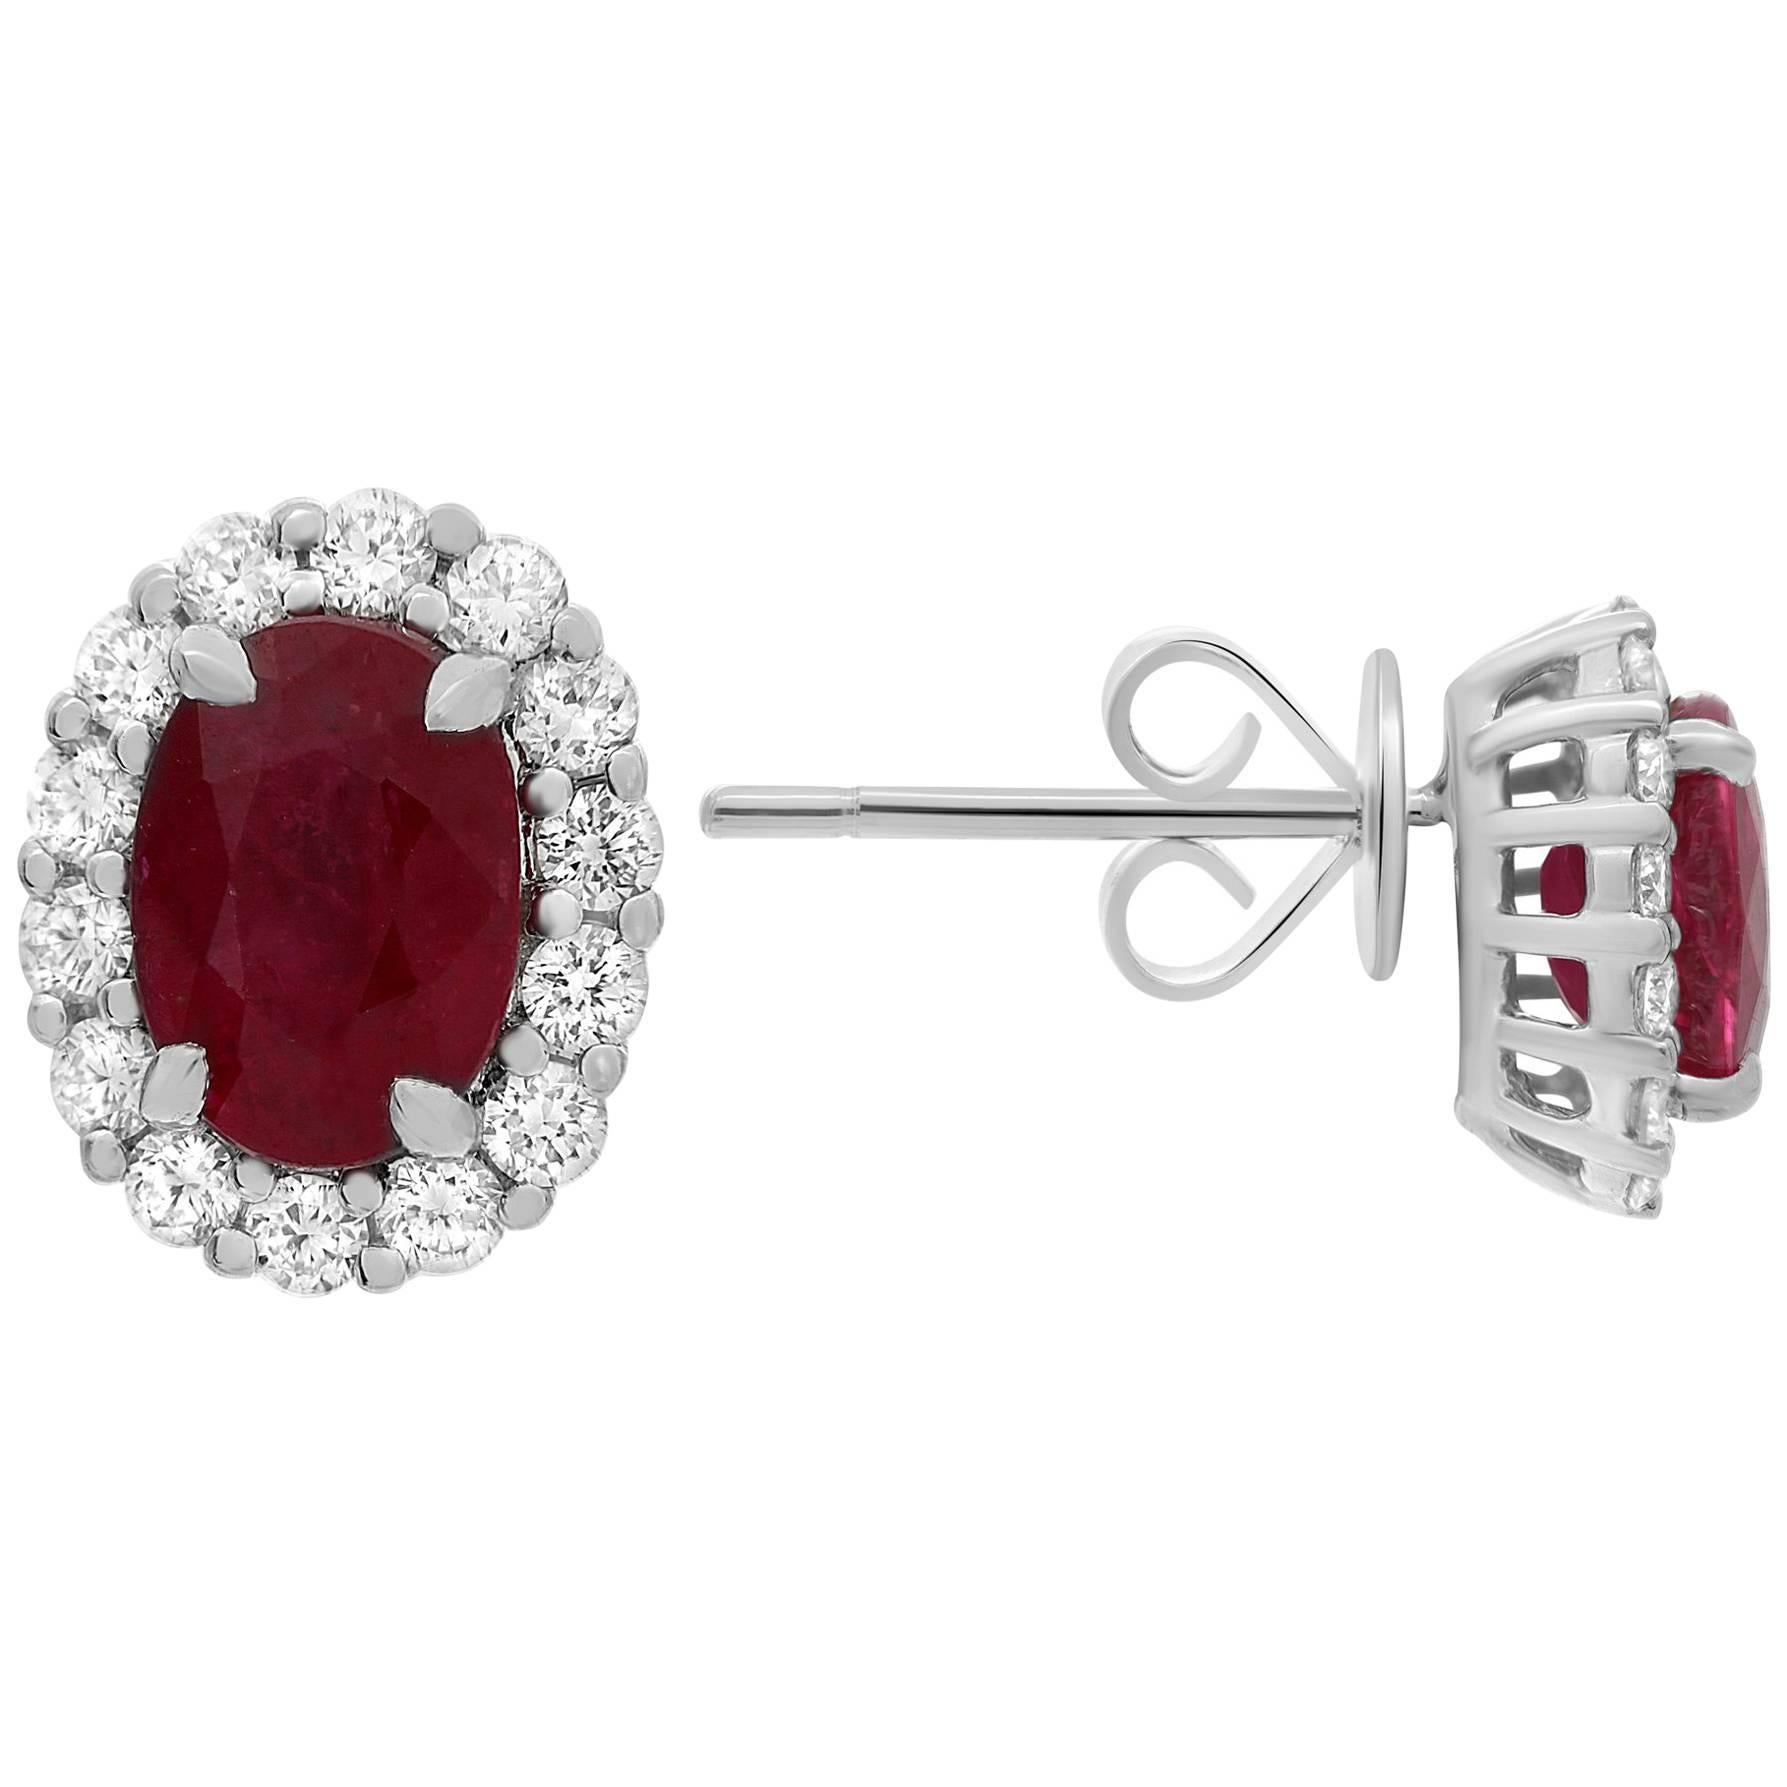 GIA Certified Oval Ruby Diamond Halo Earrings Offered by Marisa Perry Atelier For Sale